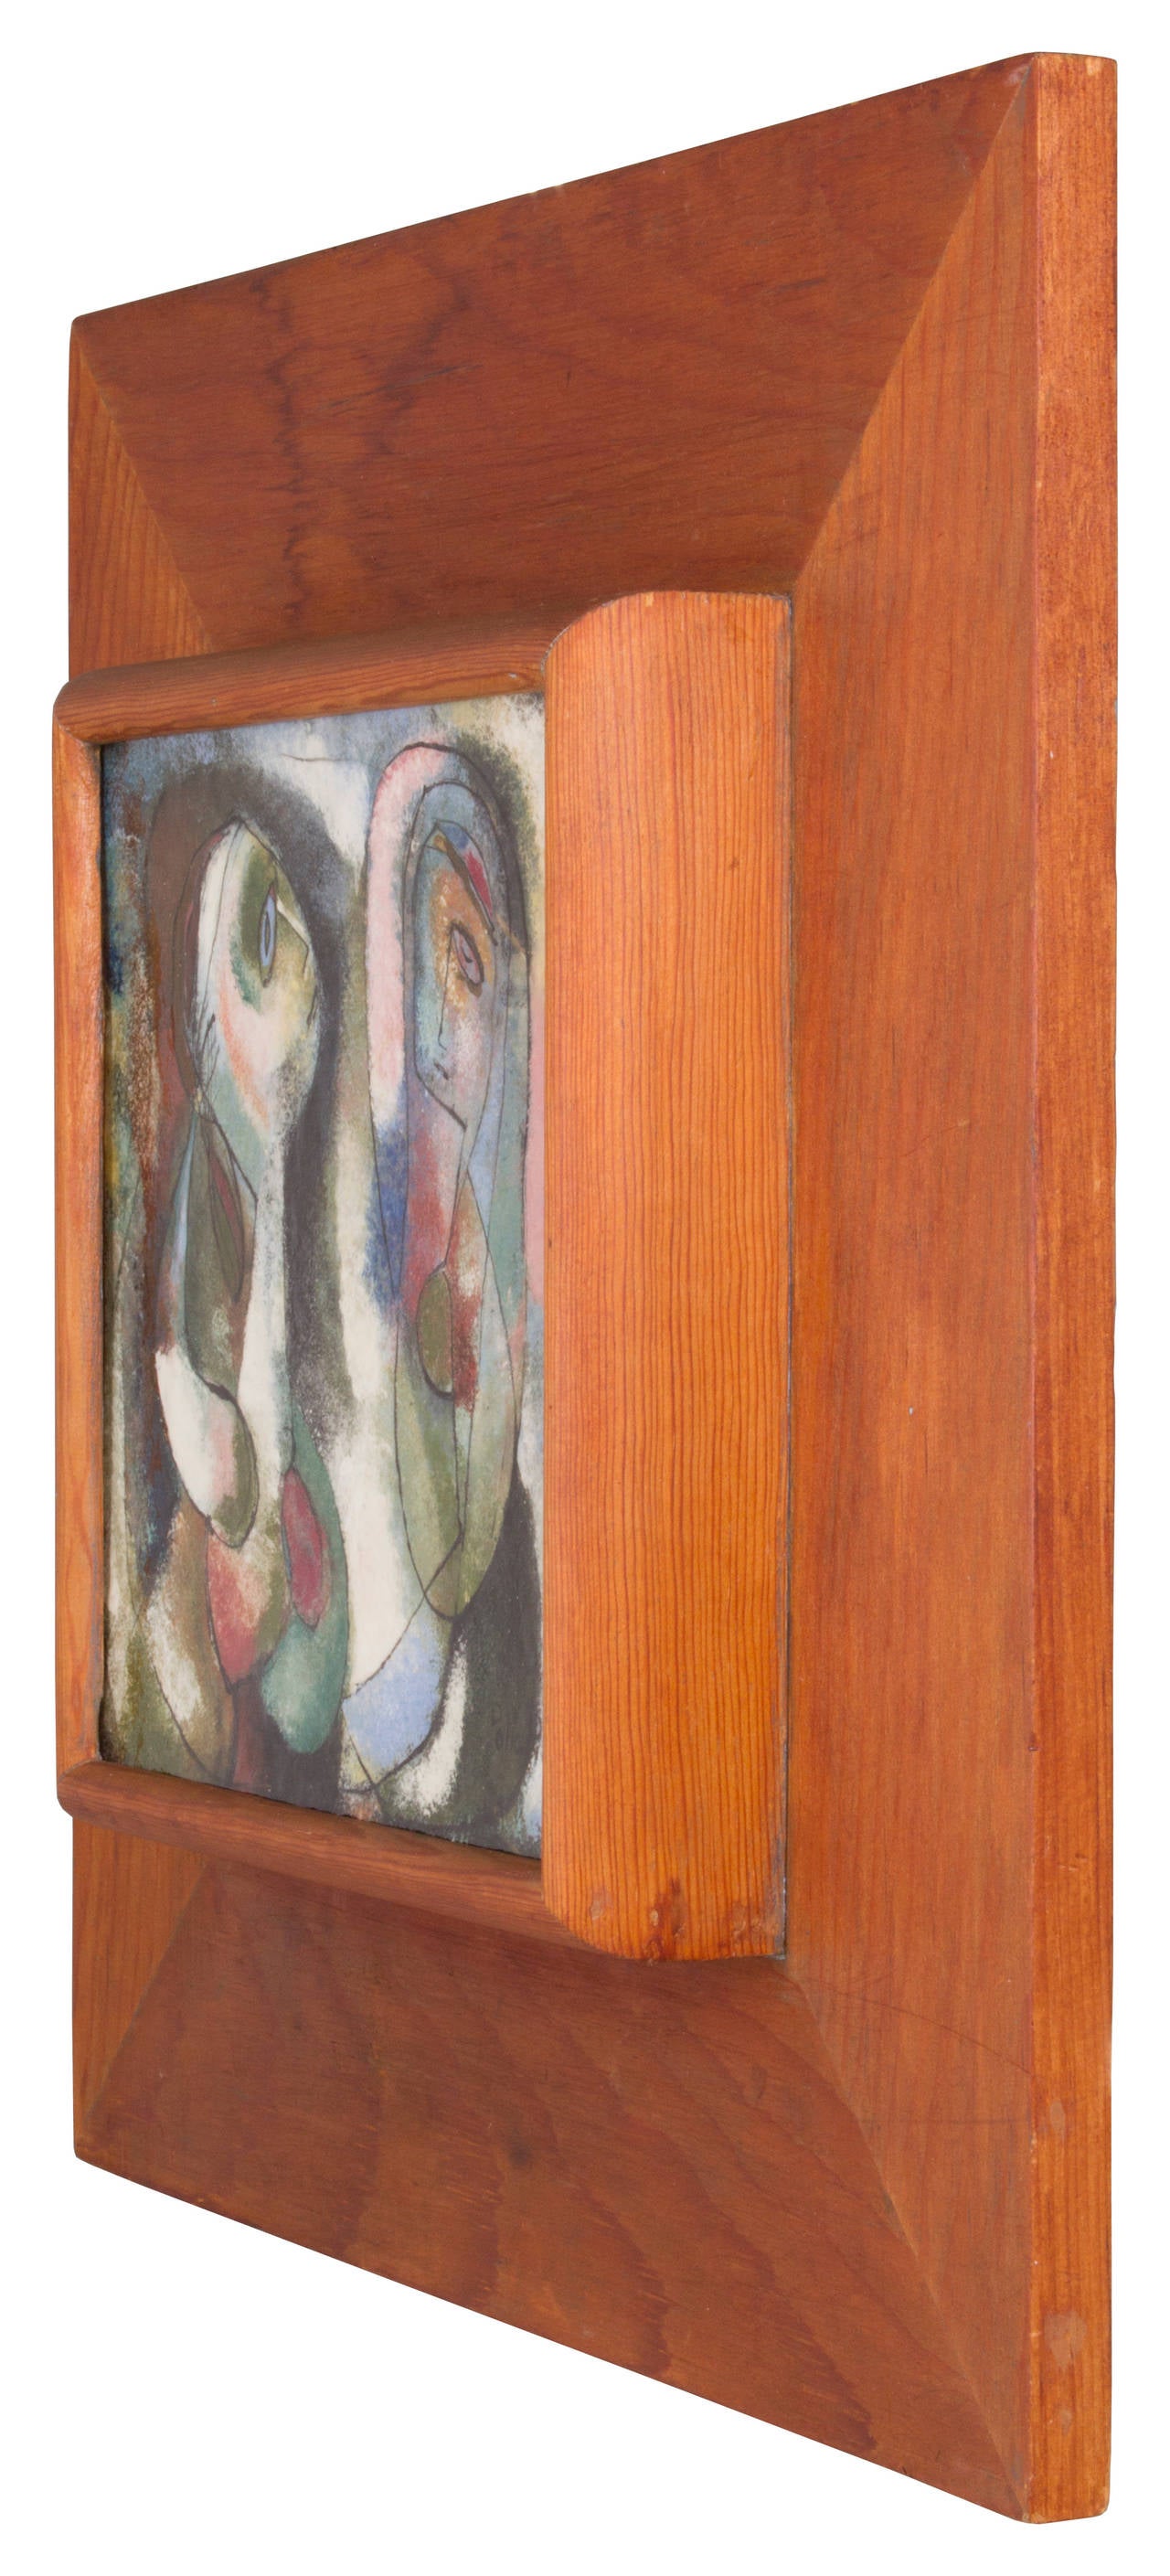 This is a wonderful and exceptional framed wall tile in the Expressionist style. This piece exemplifies Pillin's mastery of the glaze and her painterly style and has a thick glaze. The unframed tile measures 10